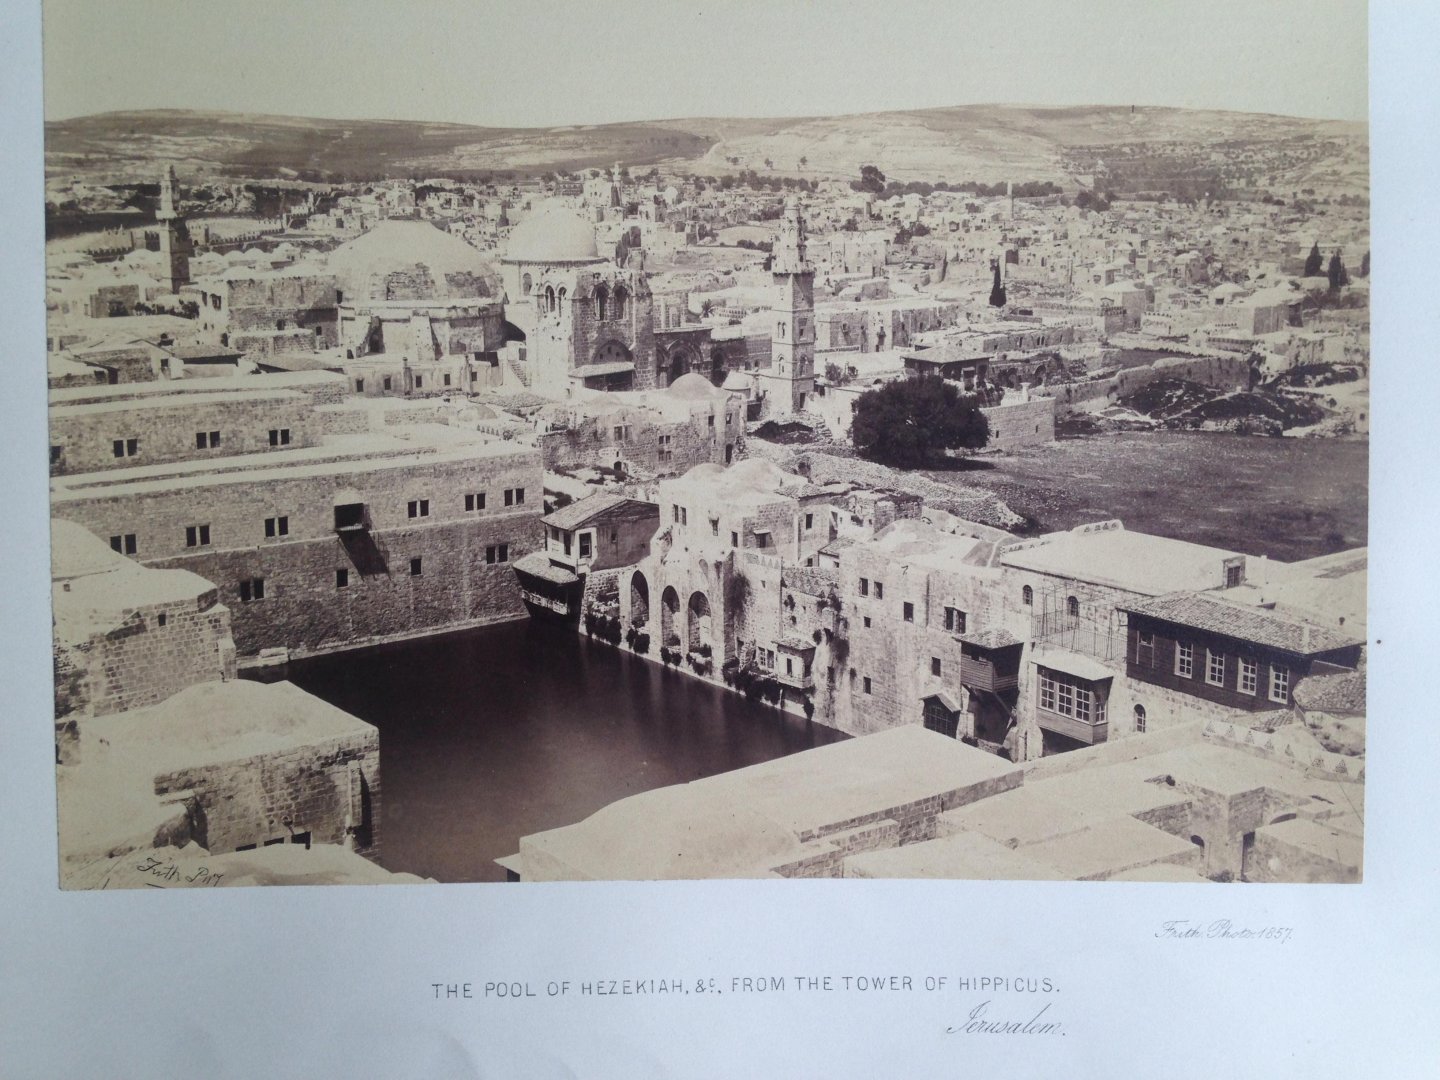 Frith, Francis - The Pool of Hezekiah & c., From the Tower of Hippicus, Jerusalem,  Series Egypt and Palestine